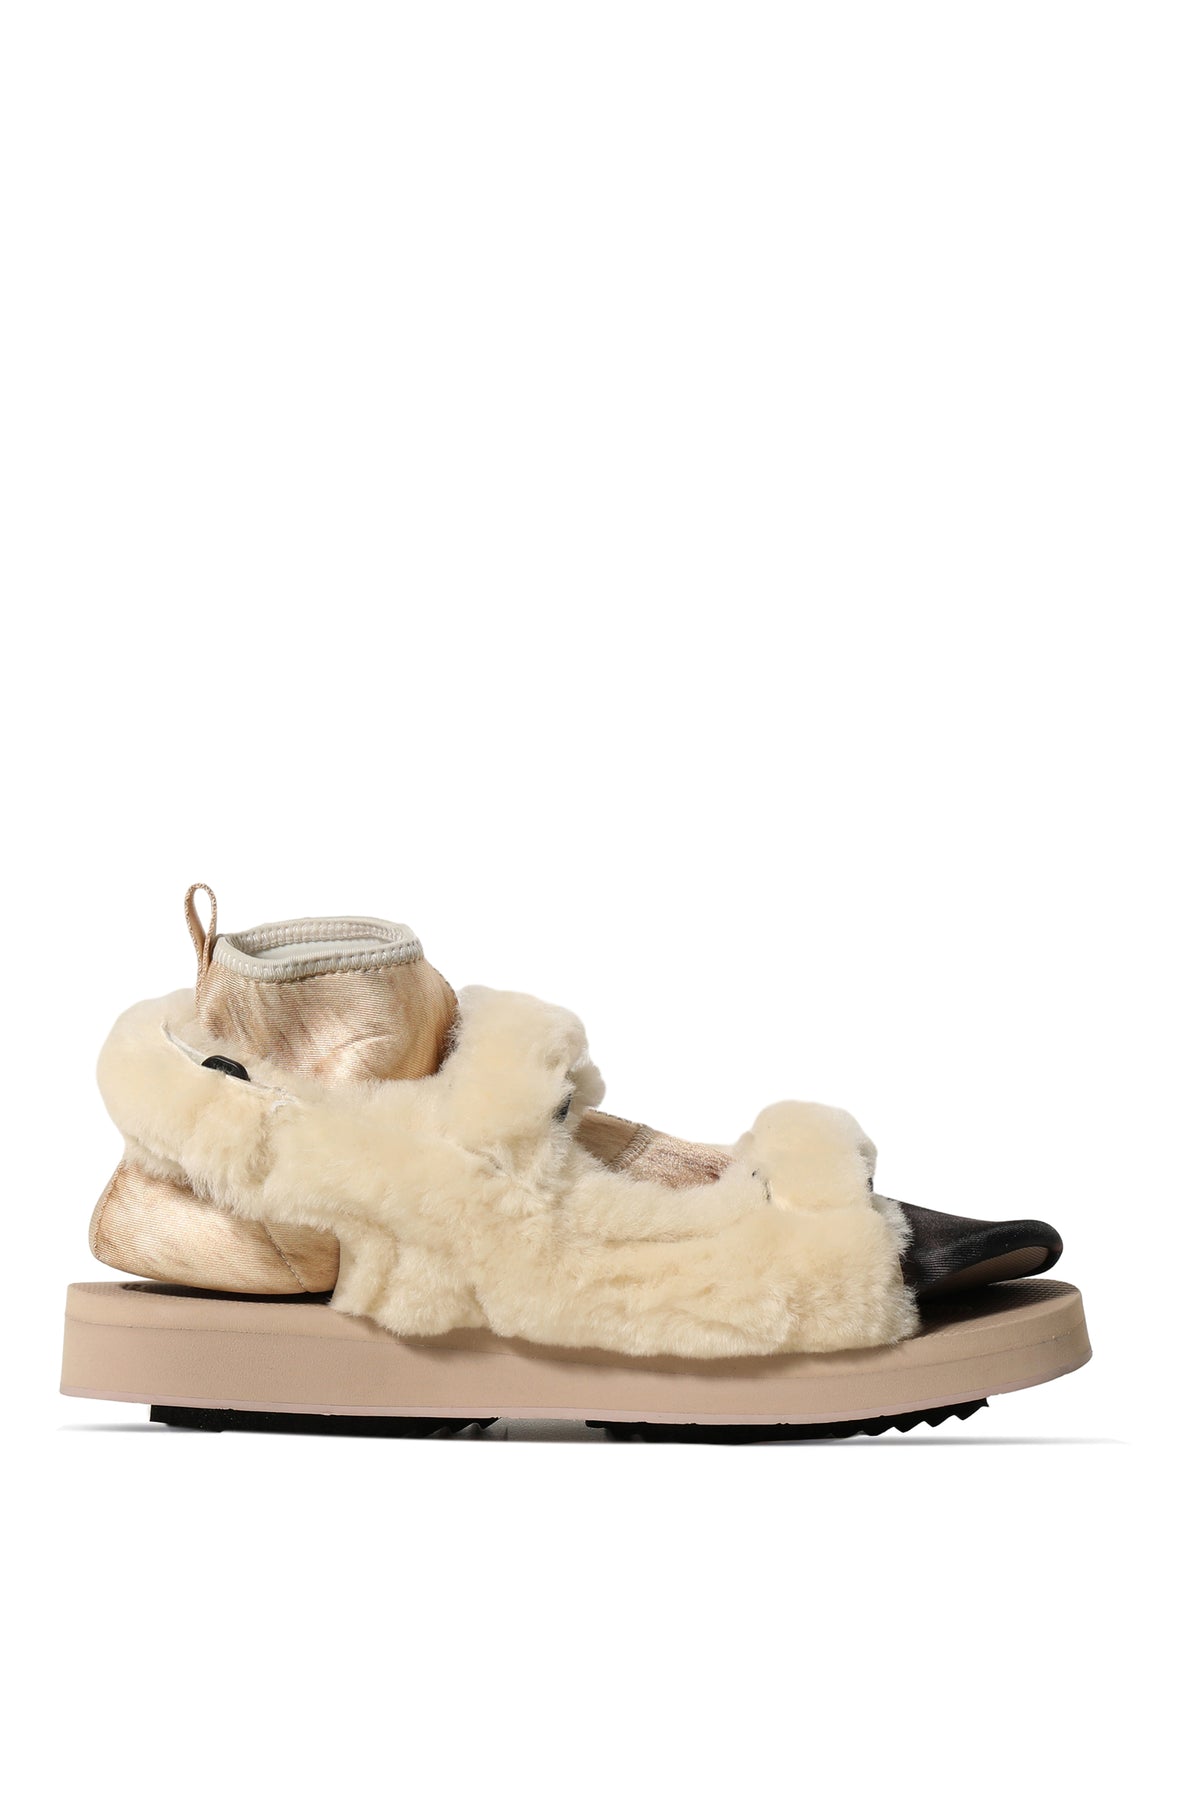 ANIMAL FOOT LAYERED SANDALS / IVORY